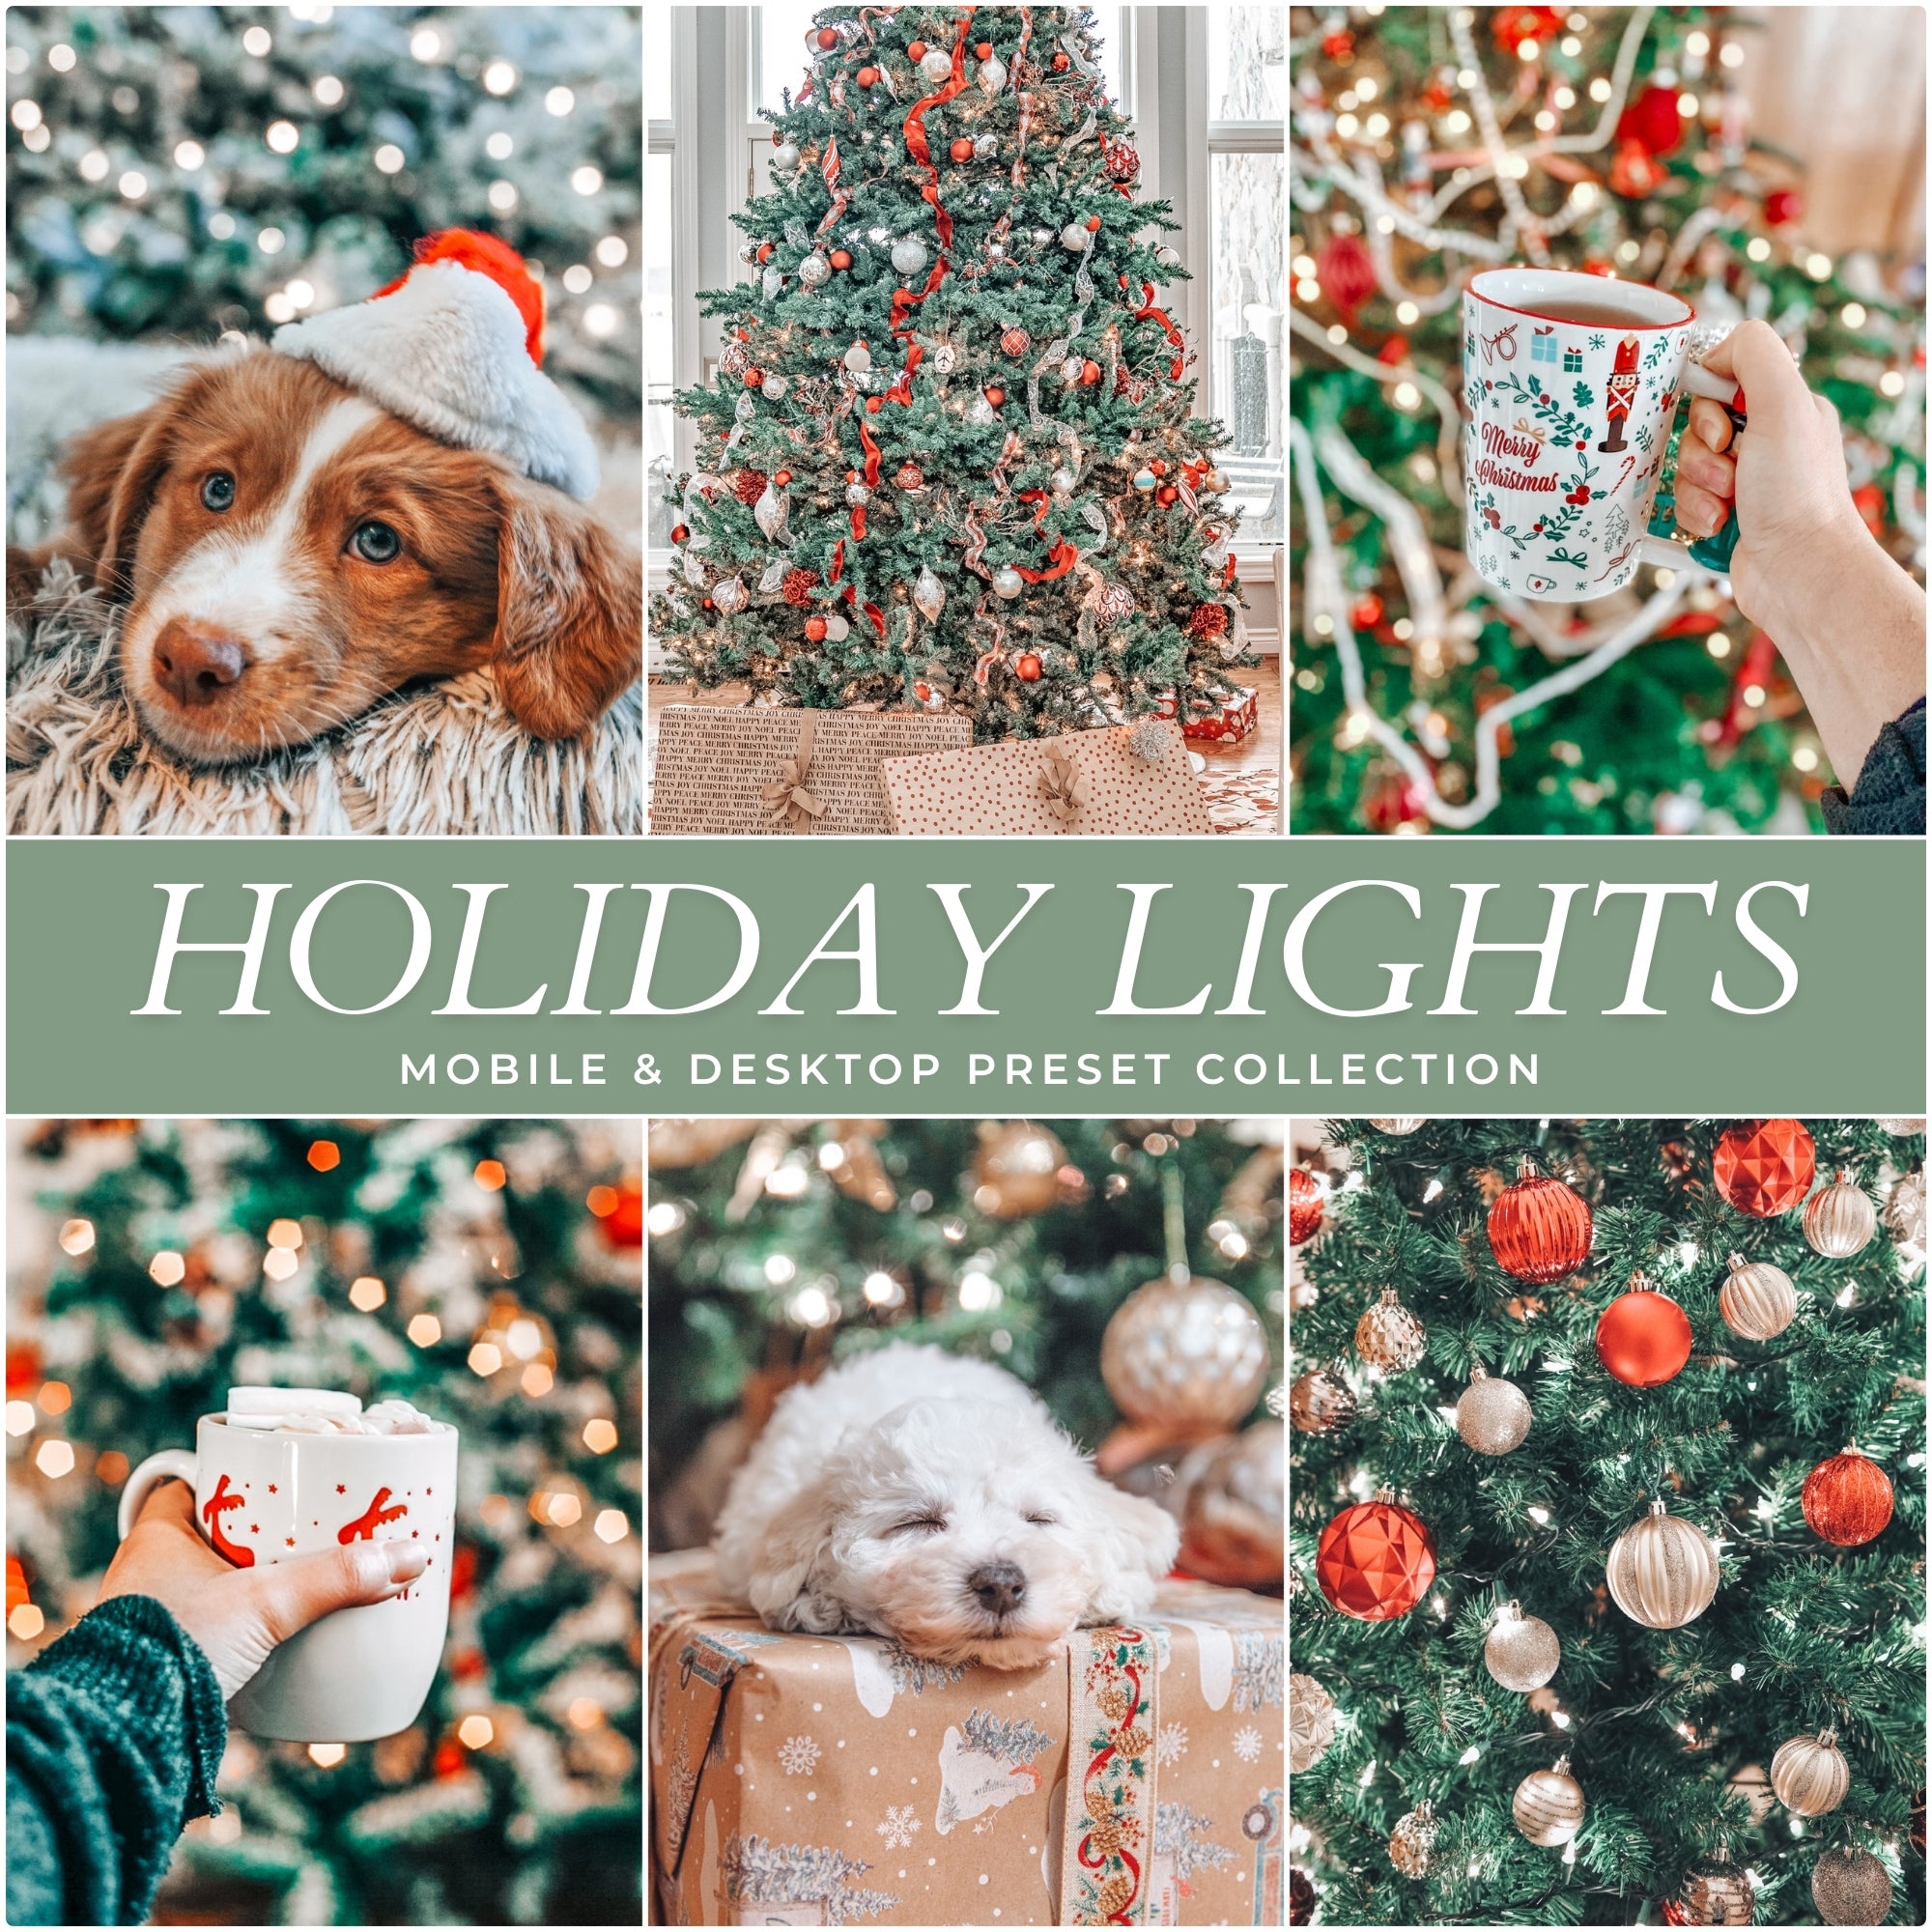 Holiday Lights Christmas Lightroom Presets For Photographers and Instagram Influencers Photo Editing In Adobe Lightroom By Lou And Marks Presets